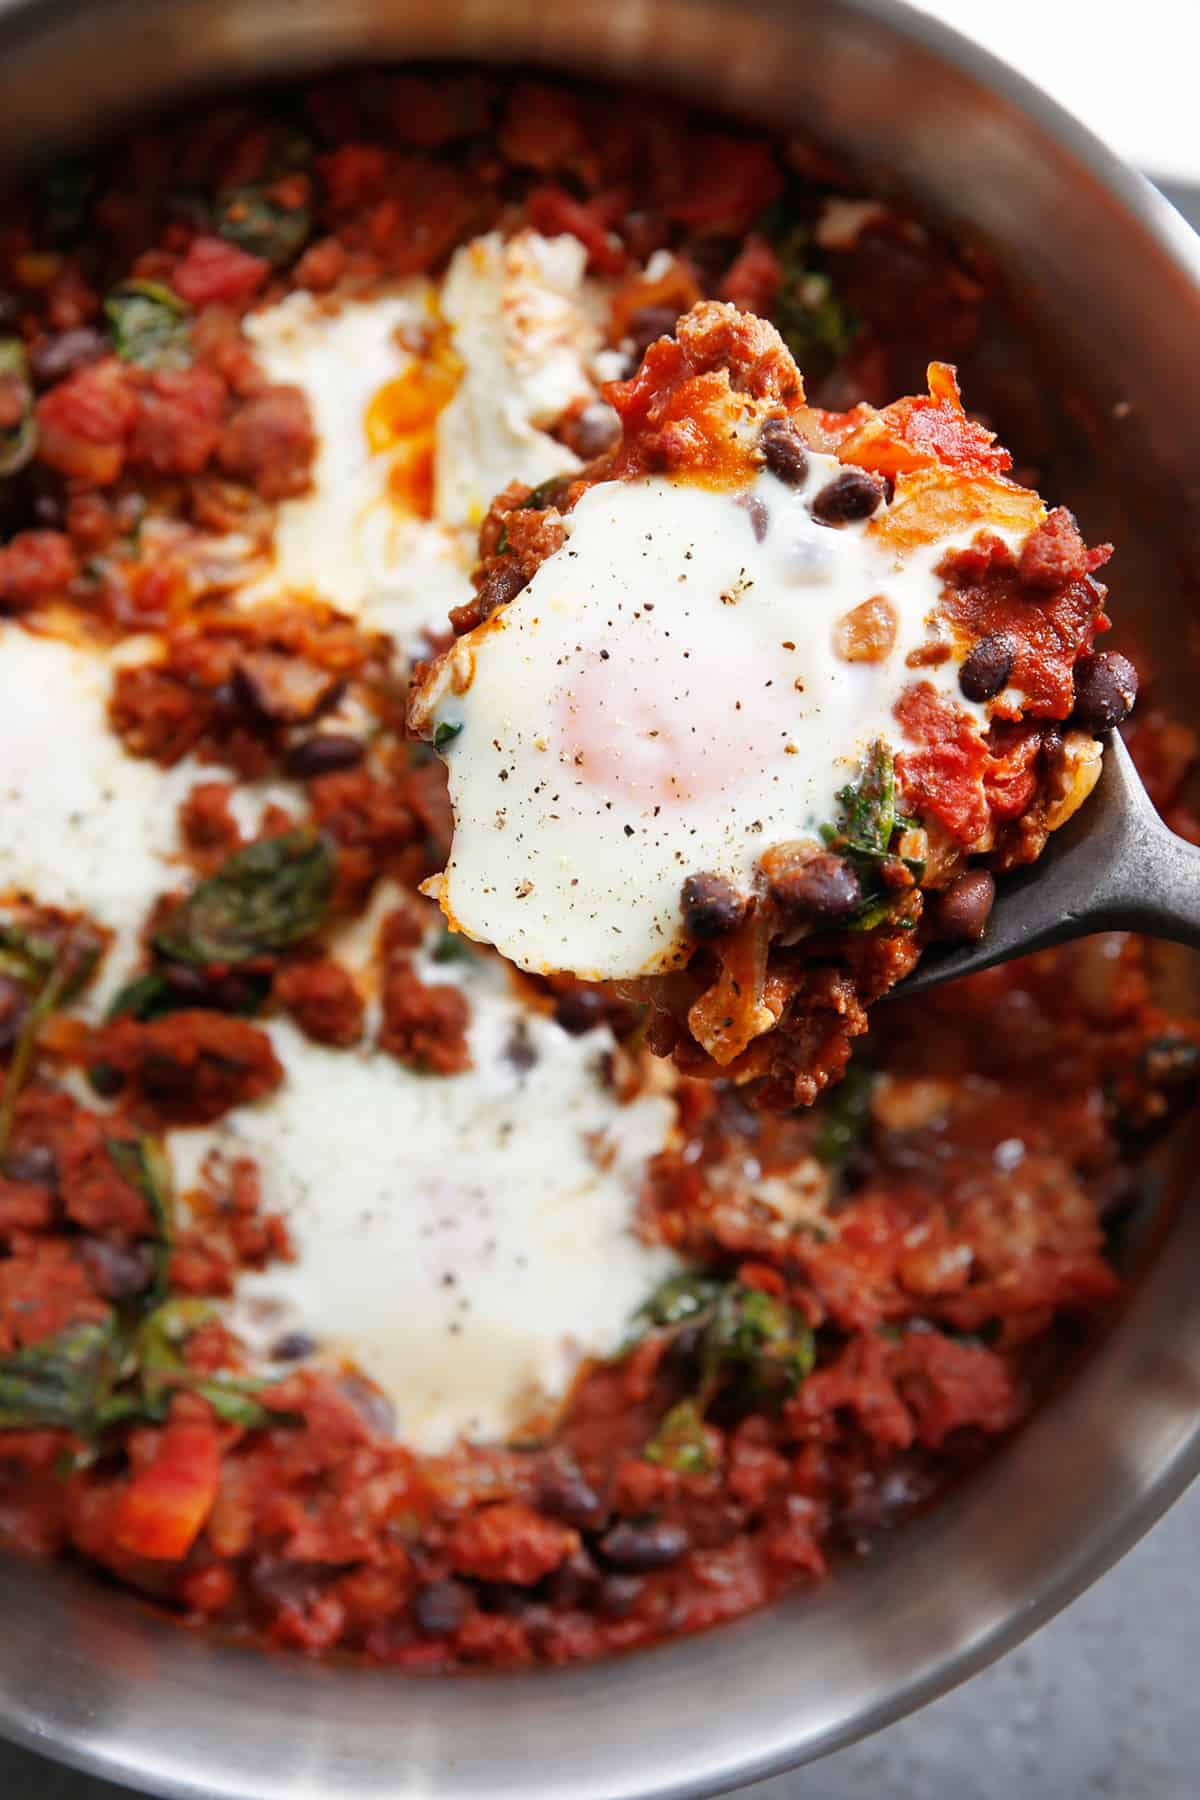 Skillet baked eggs with chorizo before serving.